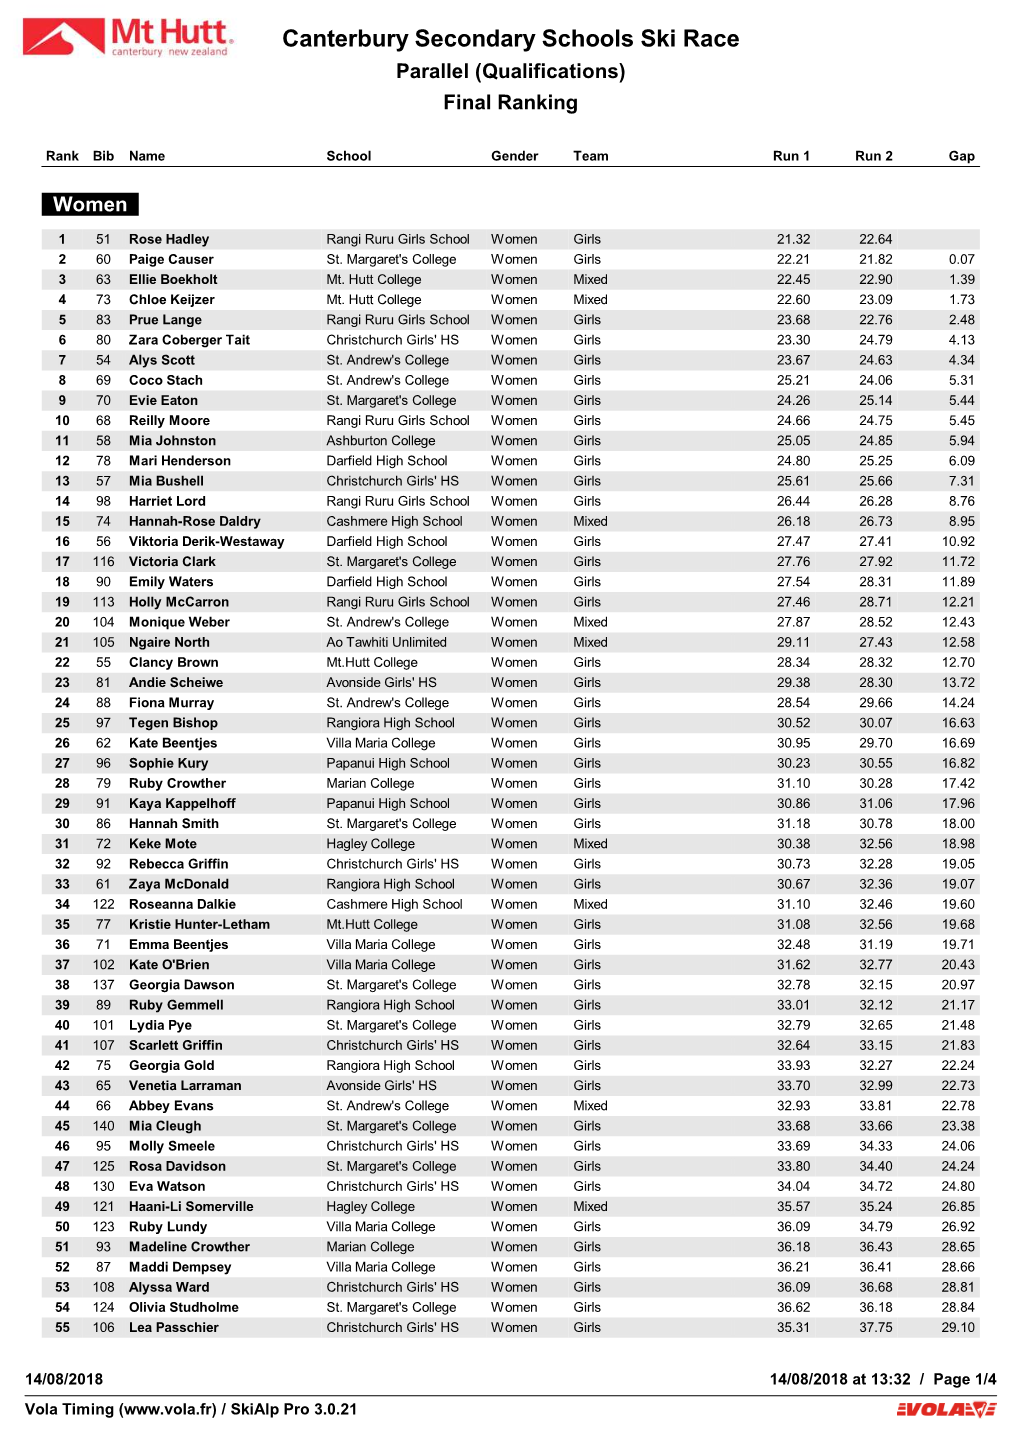 Canterbury Secondary Schools Ski Race Parallel (Qualifications) Final Ranking